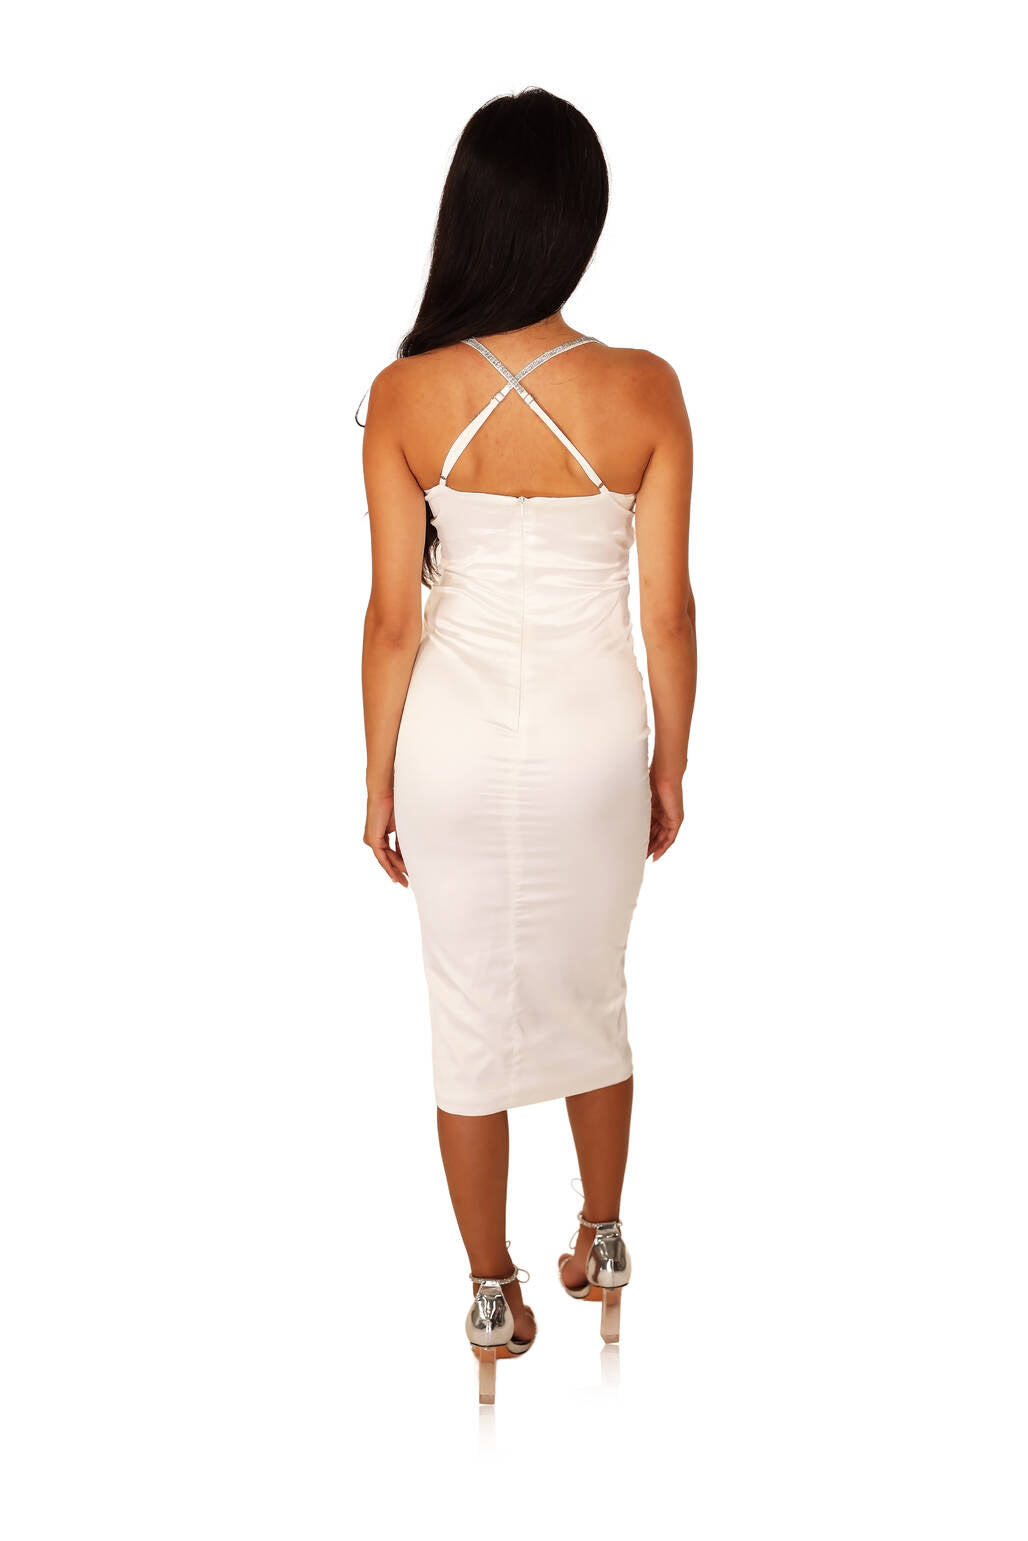 white bodycon bustier midi dress with rhinestone sparkles cutouts and ruching